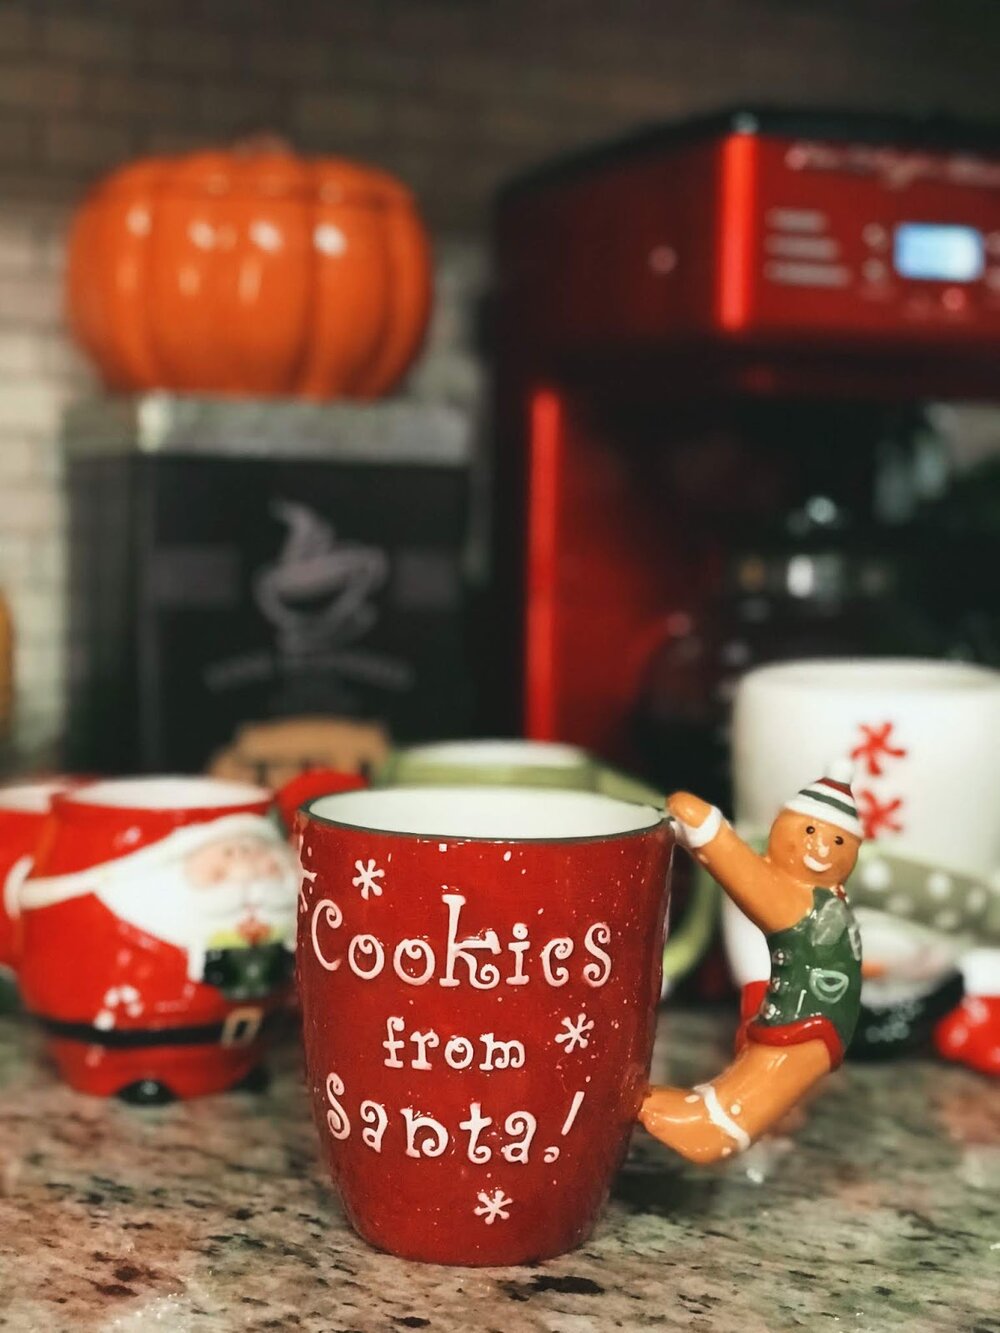 A Look AT ALL Of My Cozy And Festive Christmas Coffee Mugs That I Will Be Using This Season!